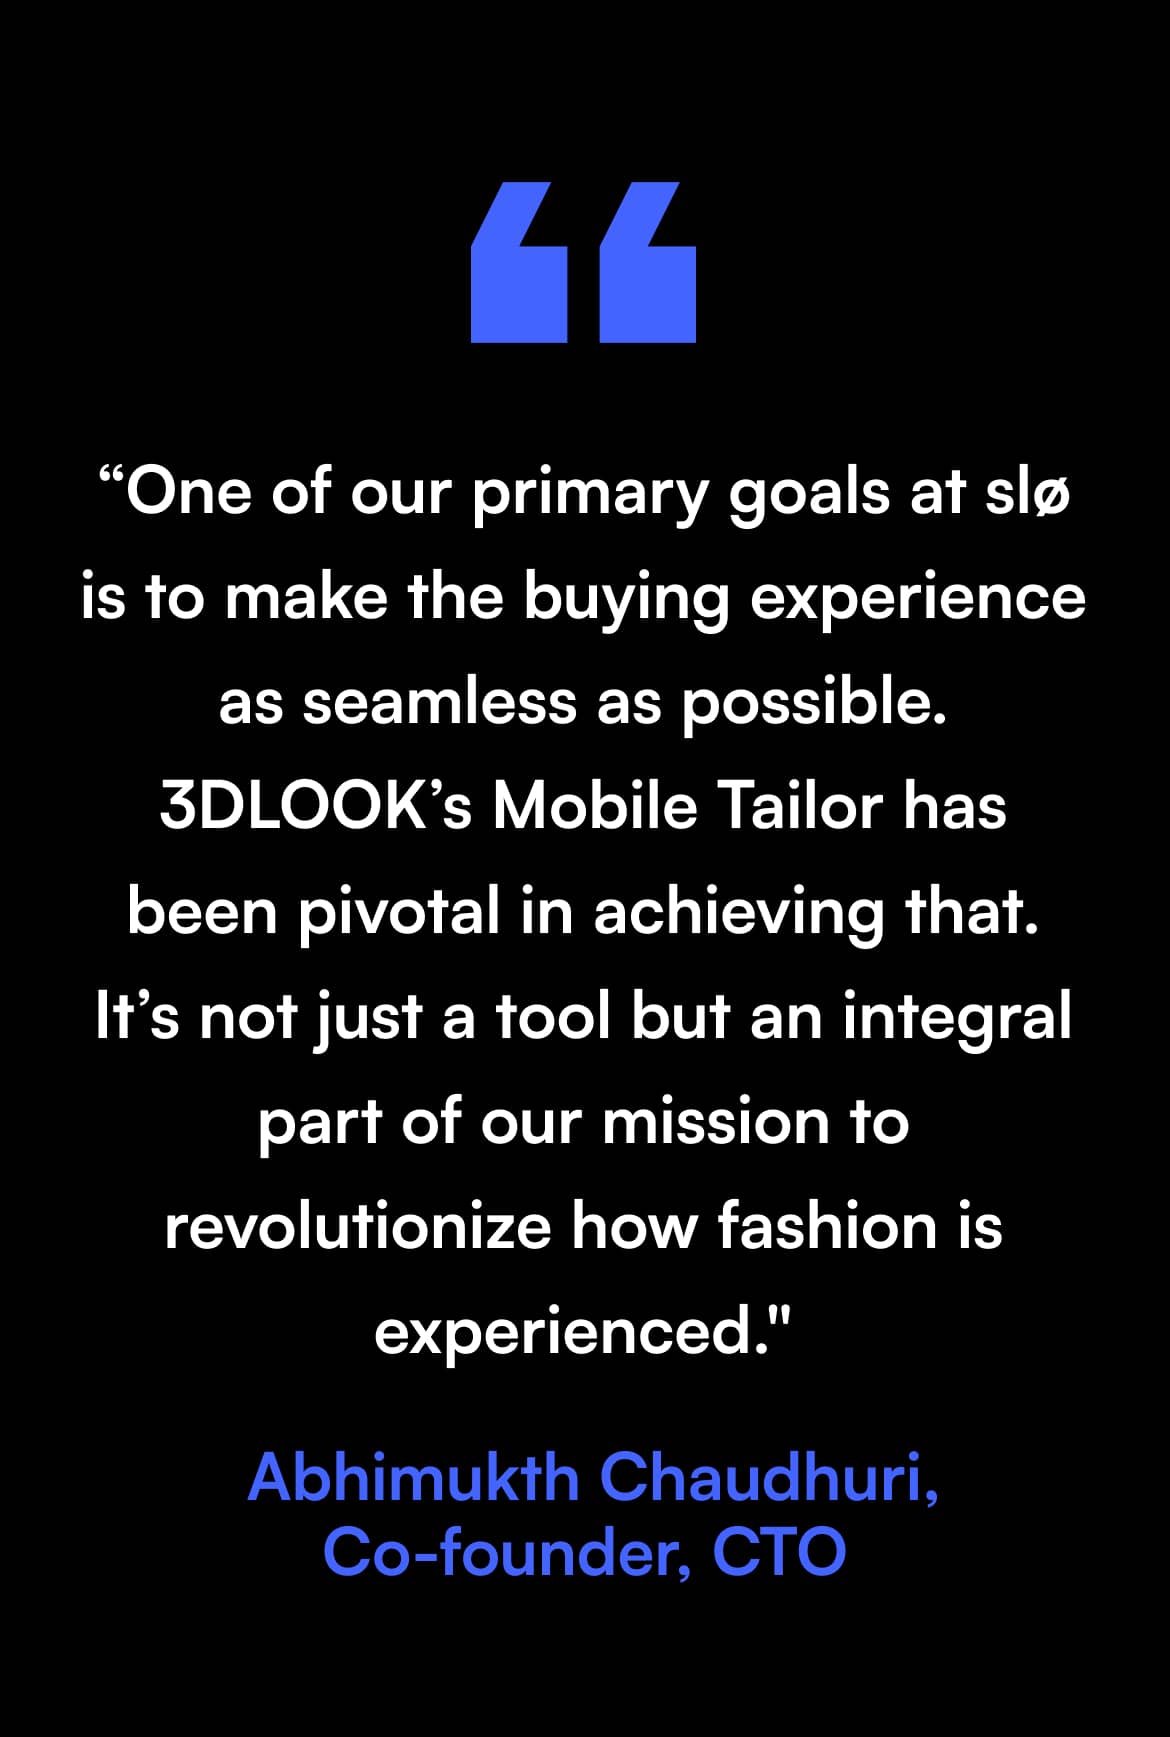 Our primary goal is to make the buying experience seamless, thanks to 3DLOOK's Mobile Tailor.